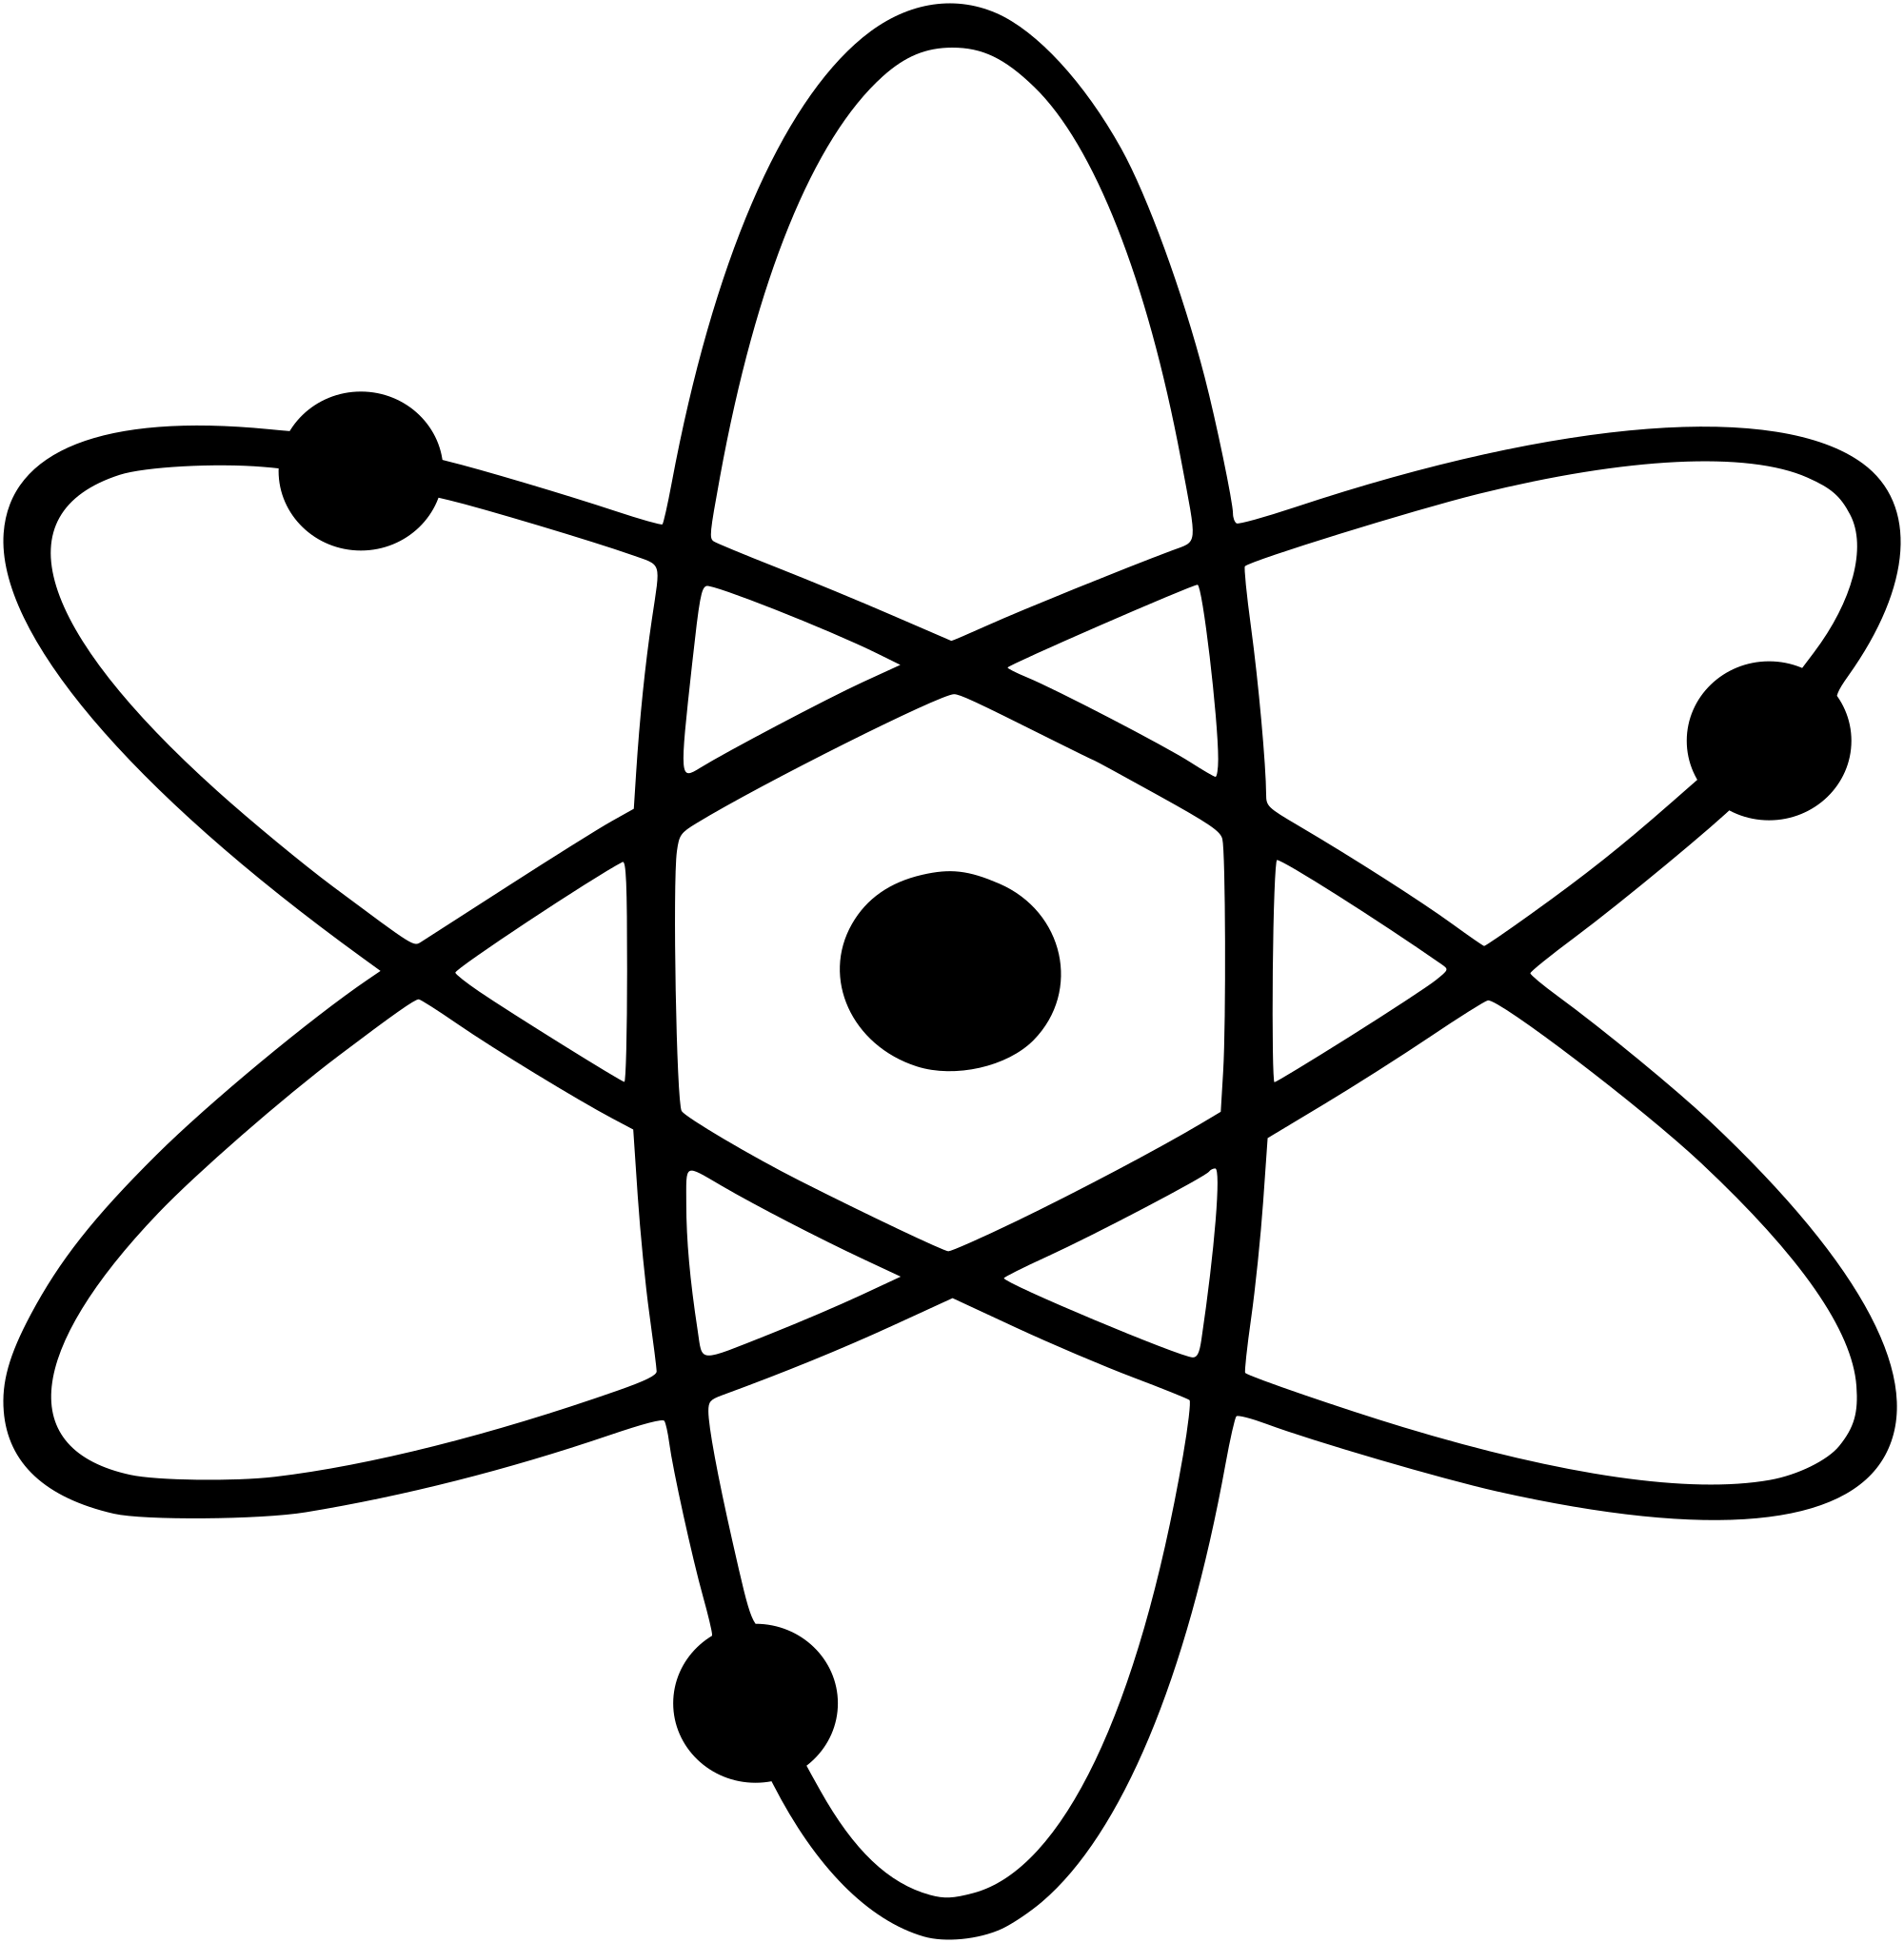 Theory Logo - File:Atom symbol as used in the logo of the television series The ...